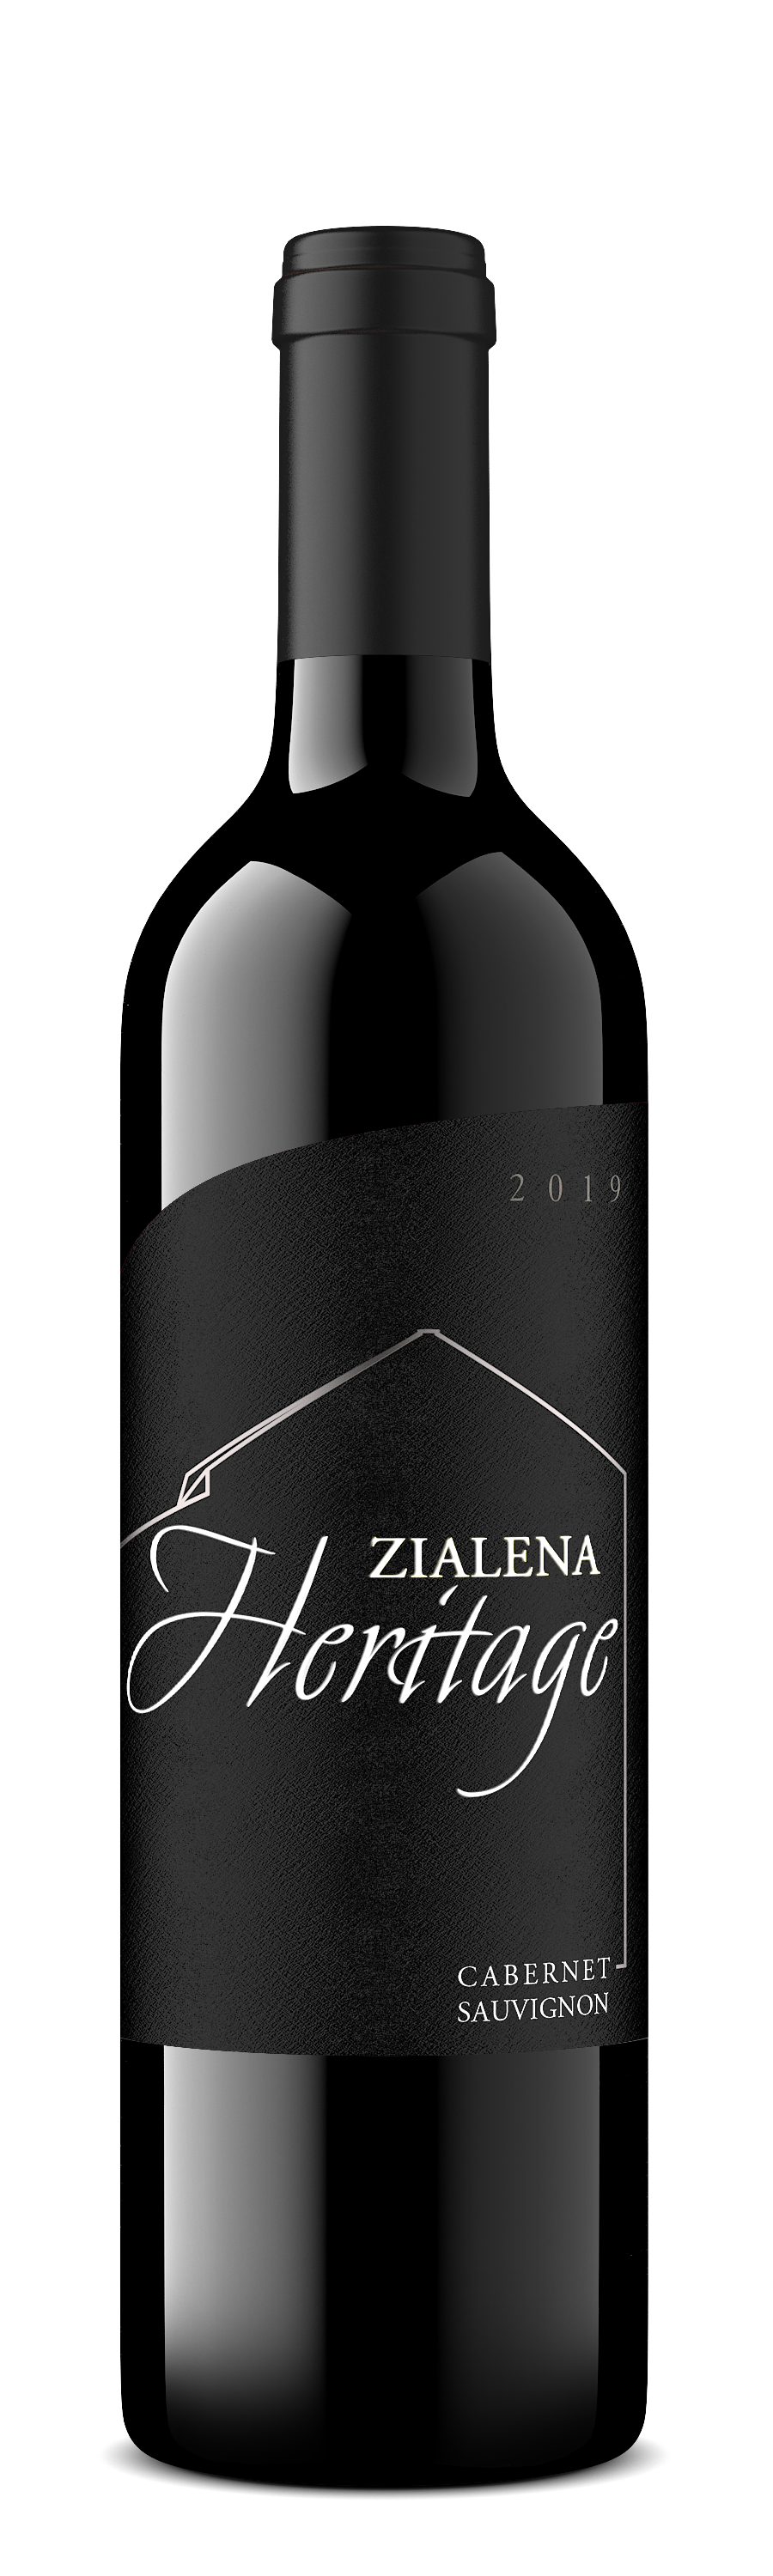 Product Image for 2019 Heritage Cabernet Sauvignon